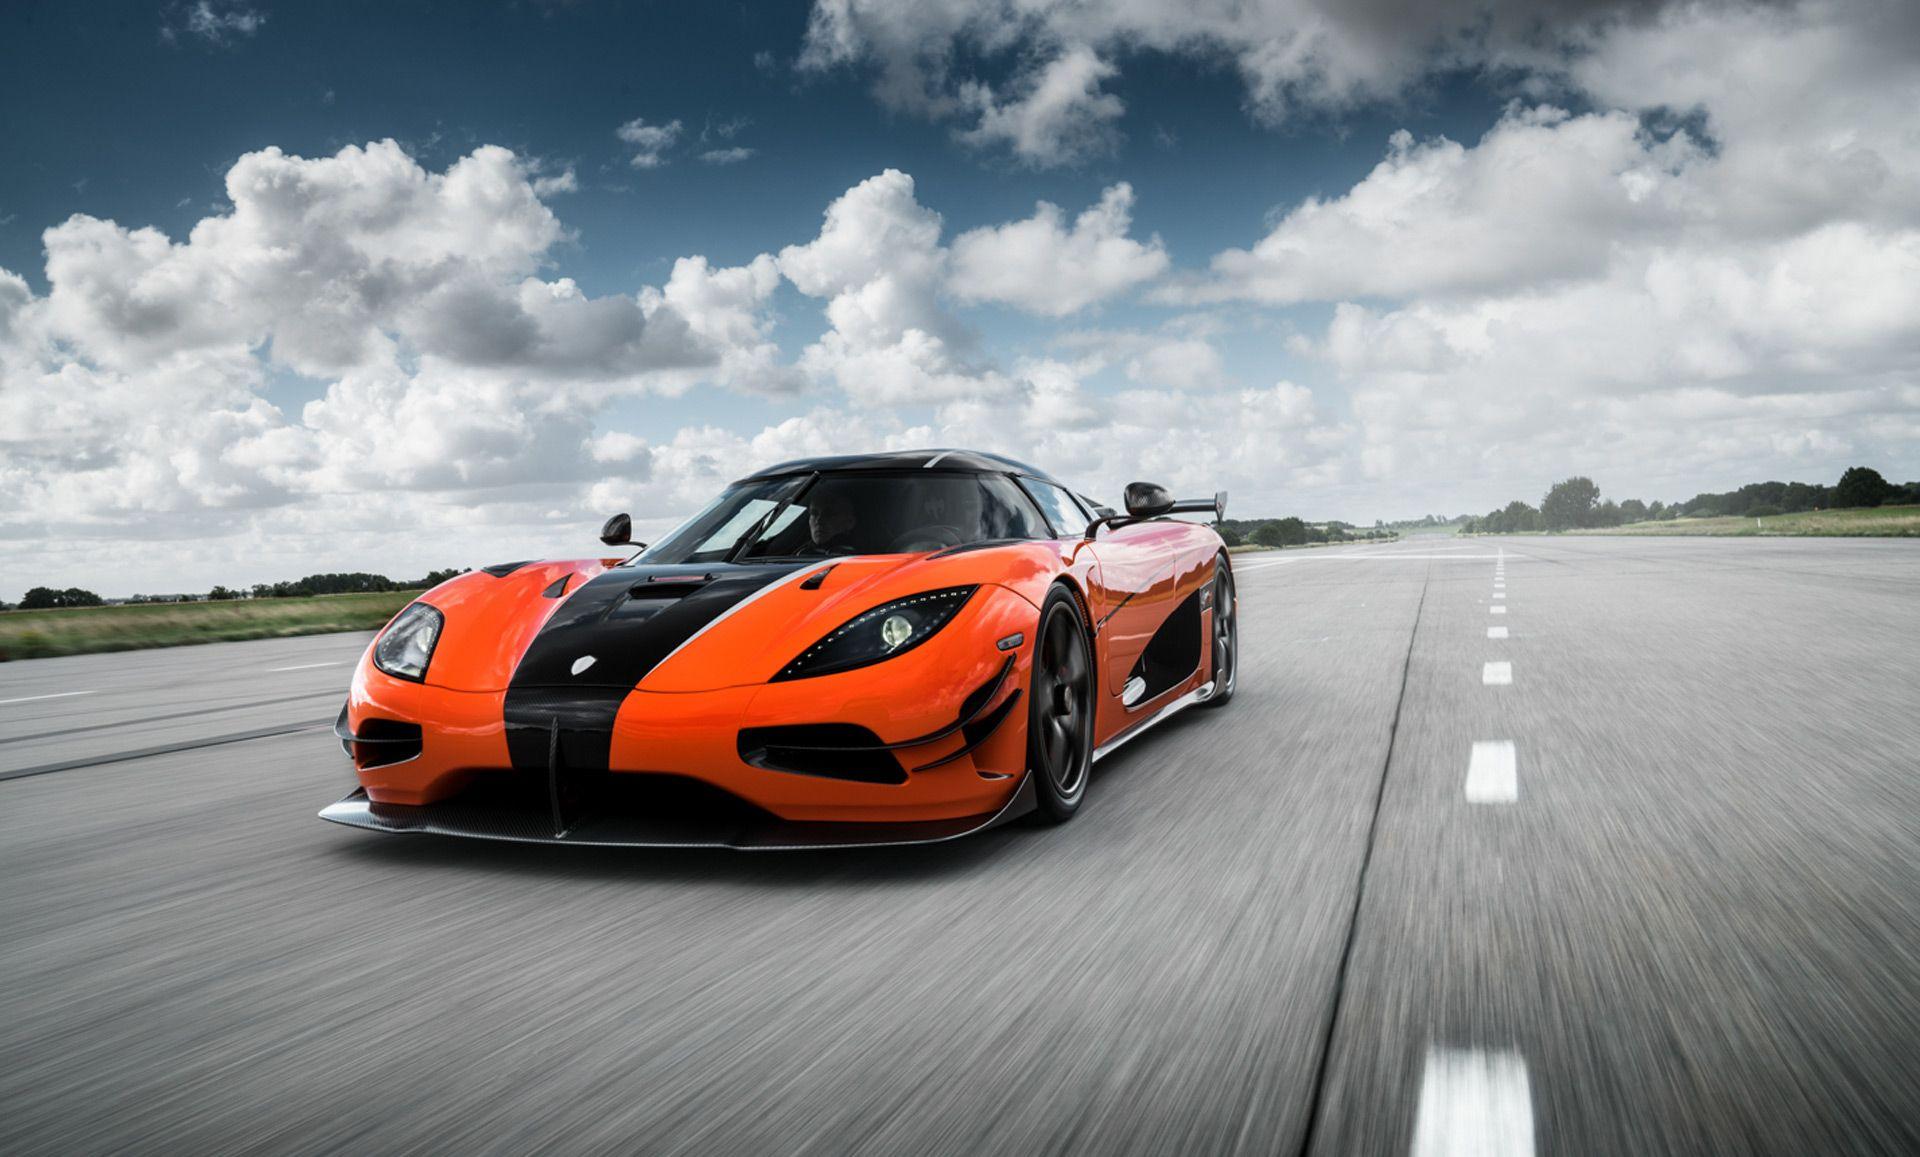 Now's your chance to work for Koenigsegg